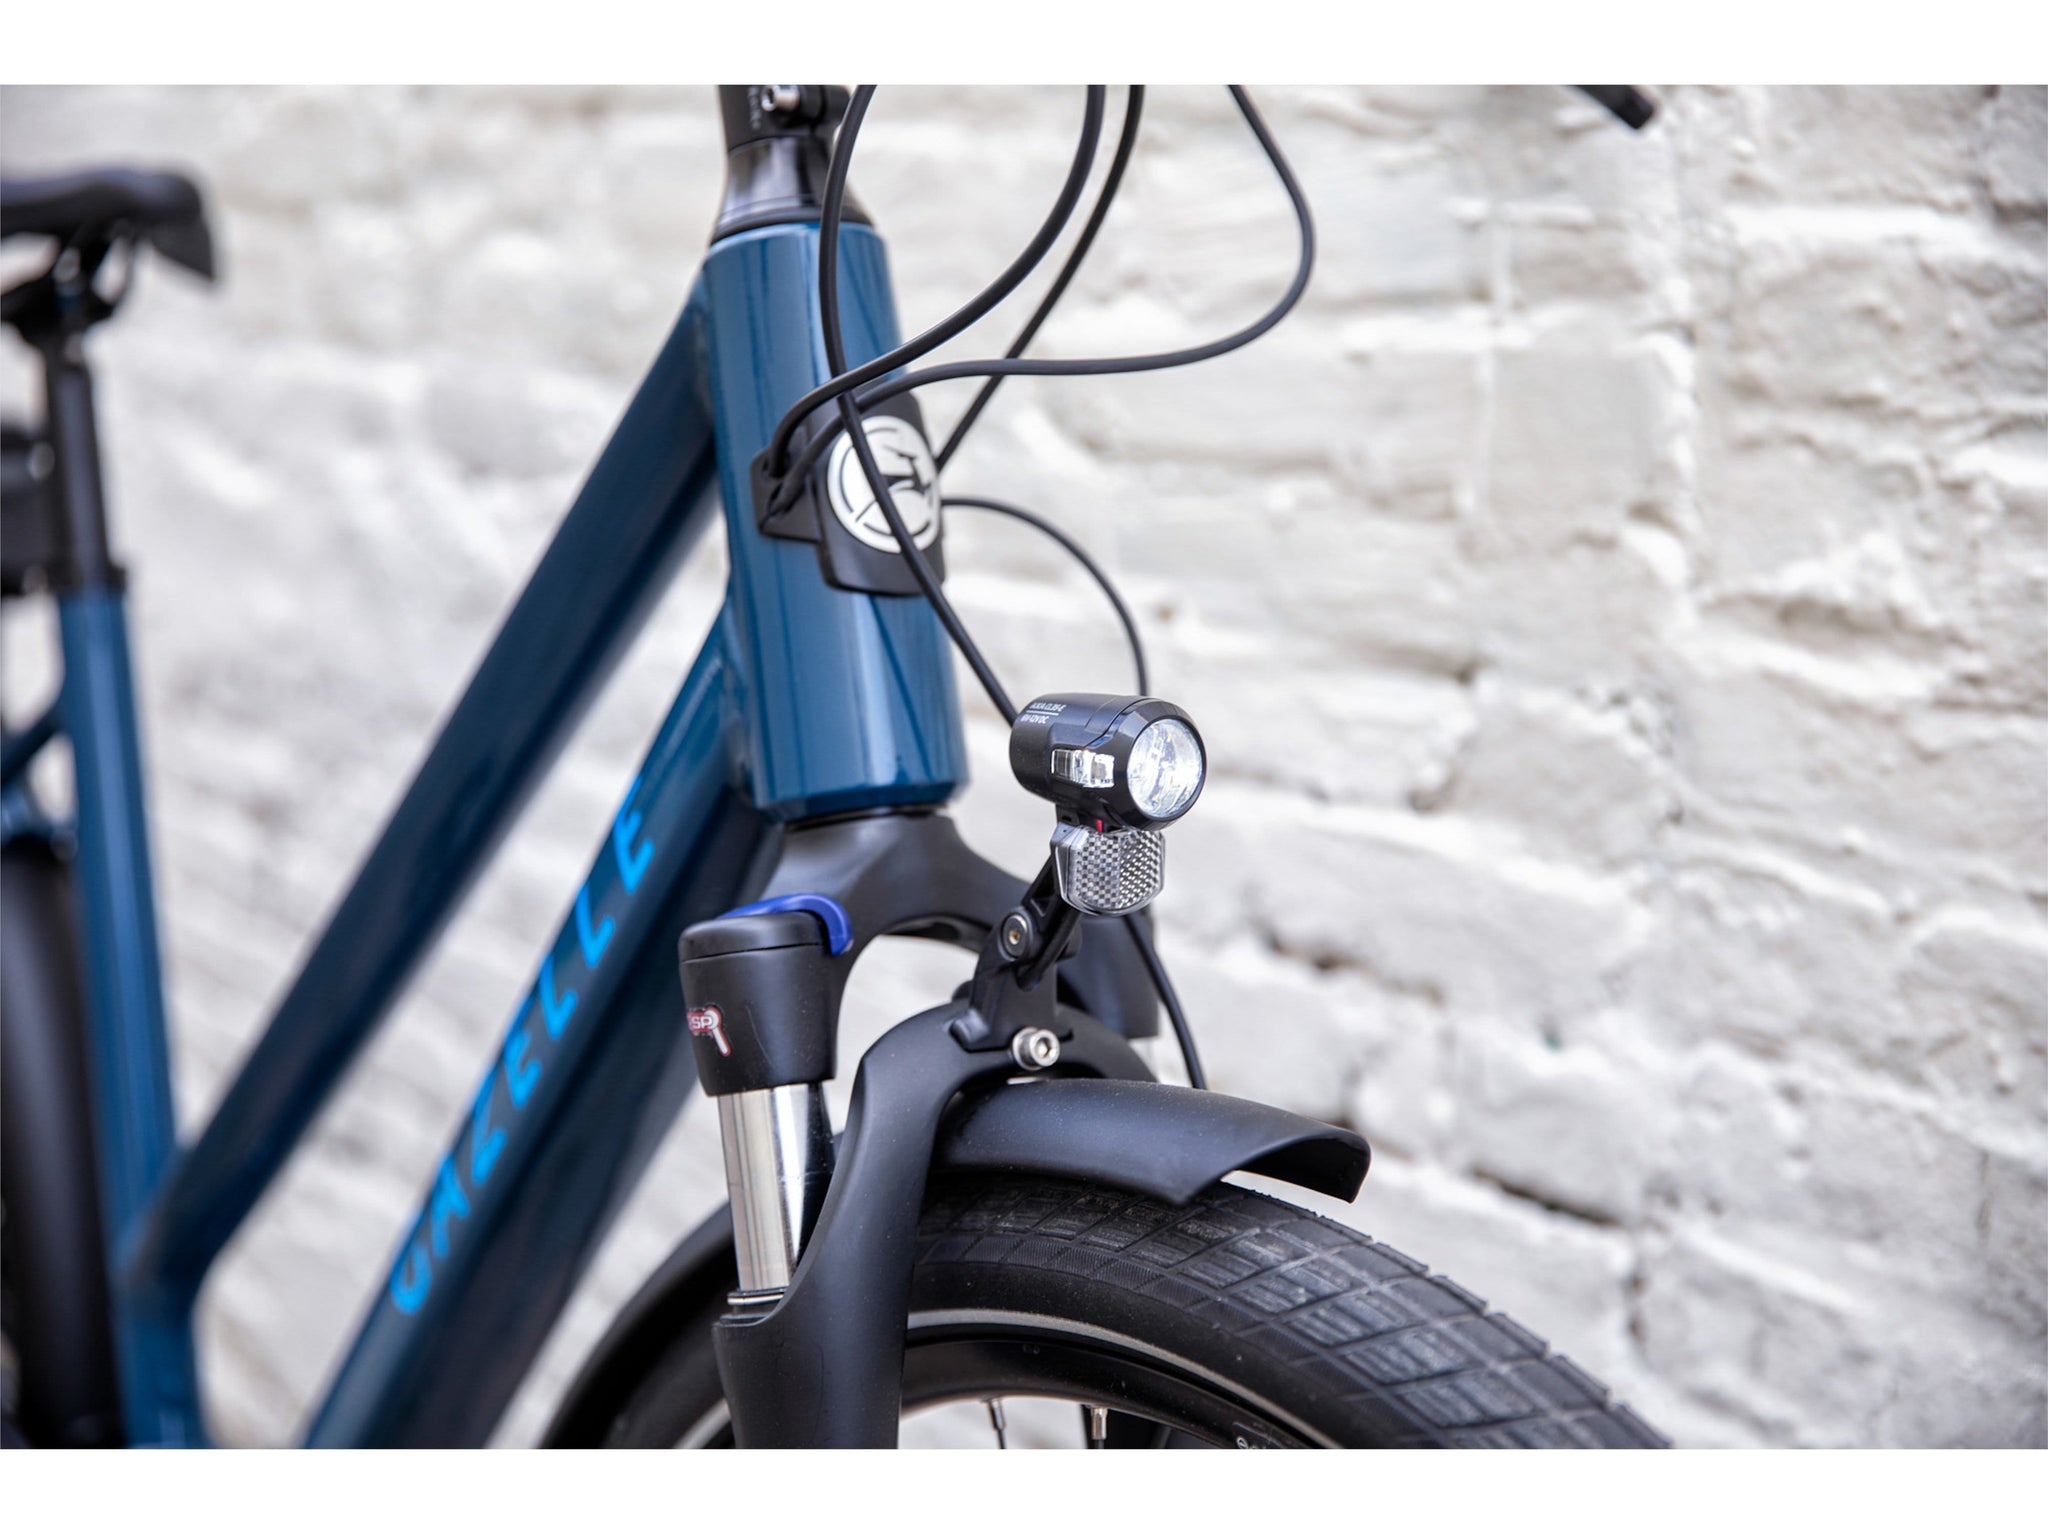 Gazelle T9 City Electric Bike For Sale | Fly Rides USA